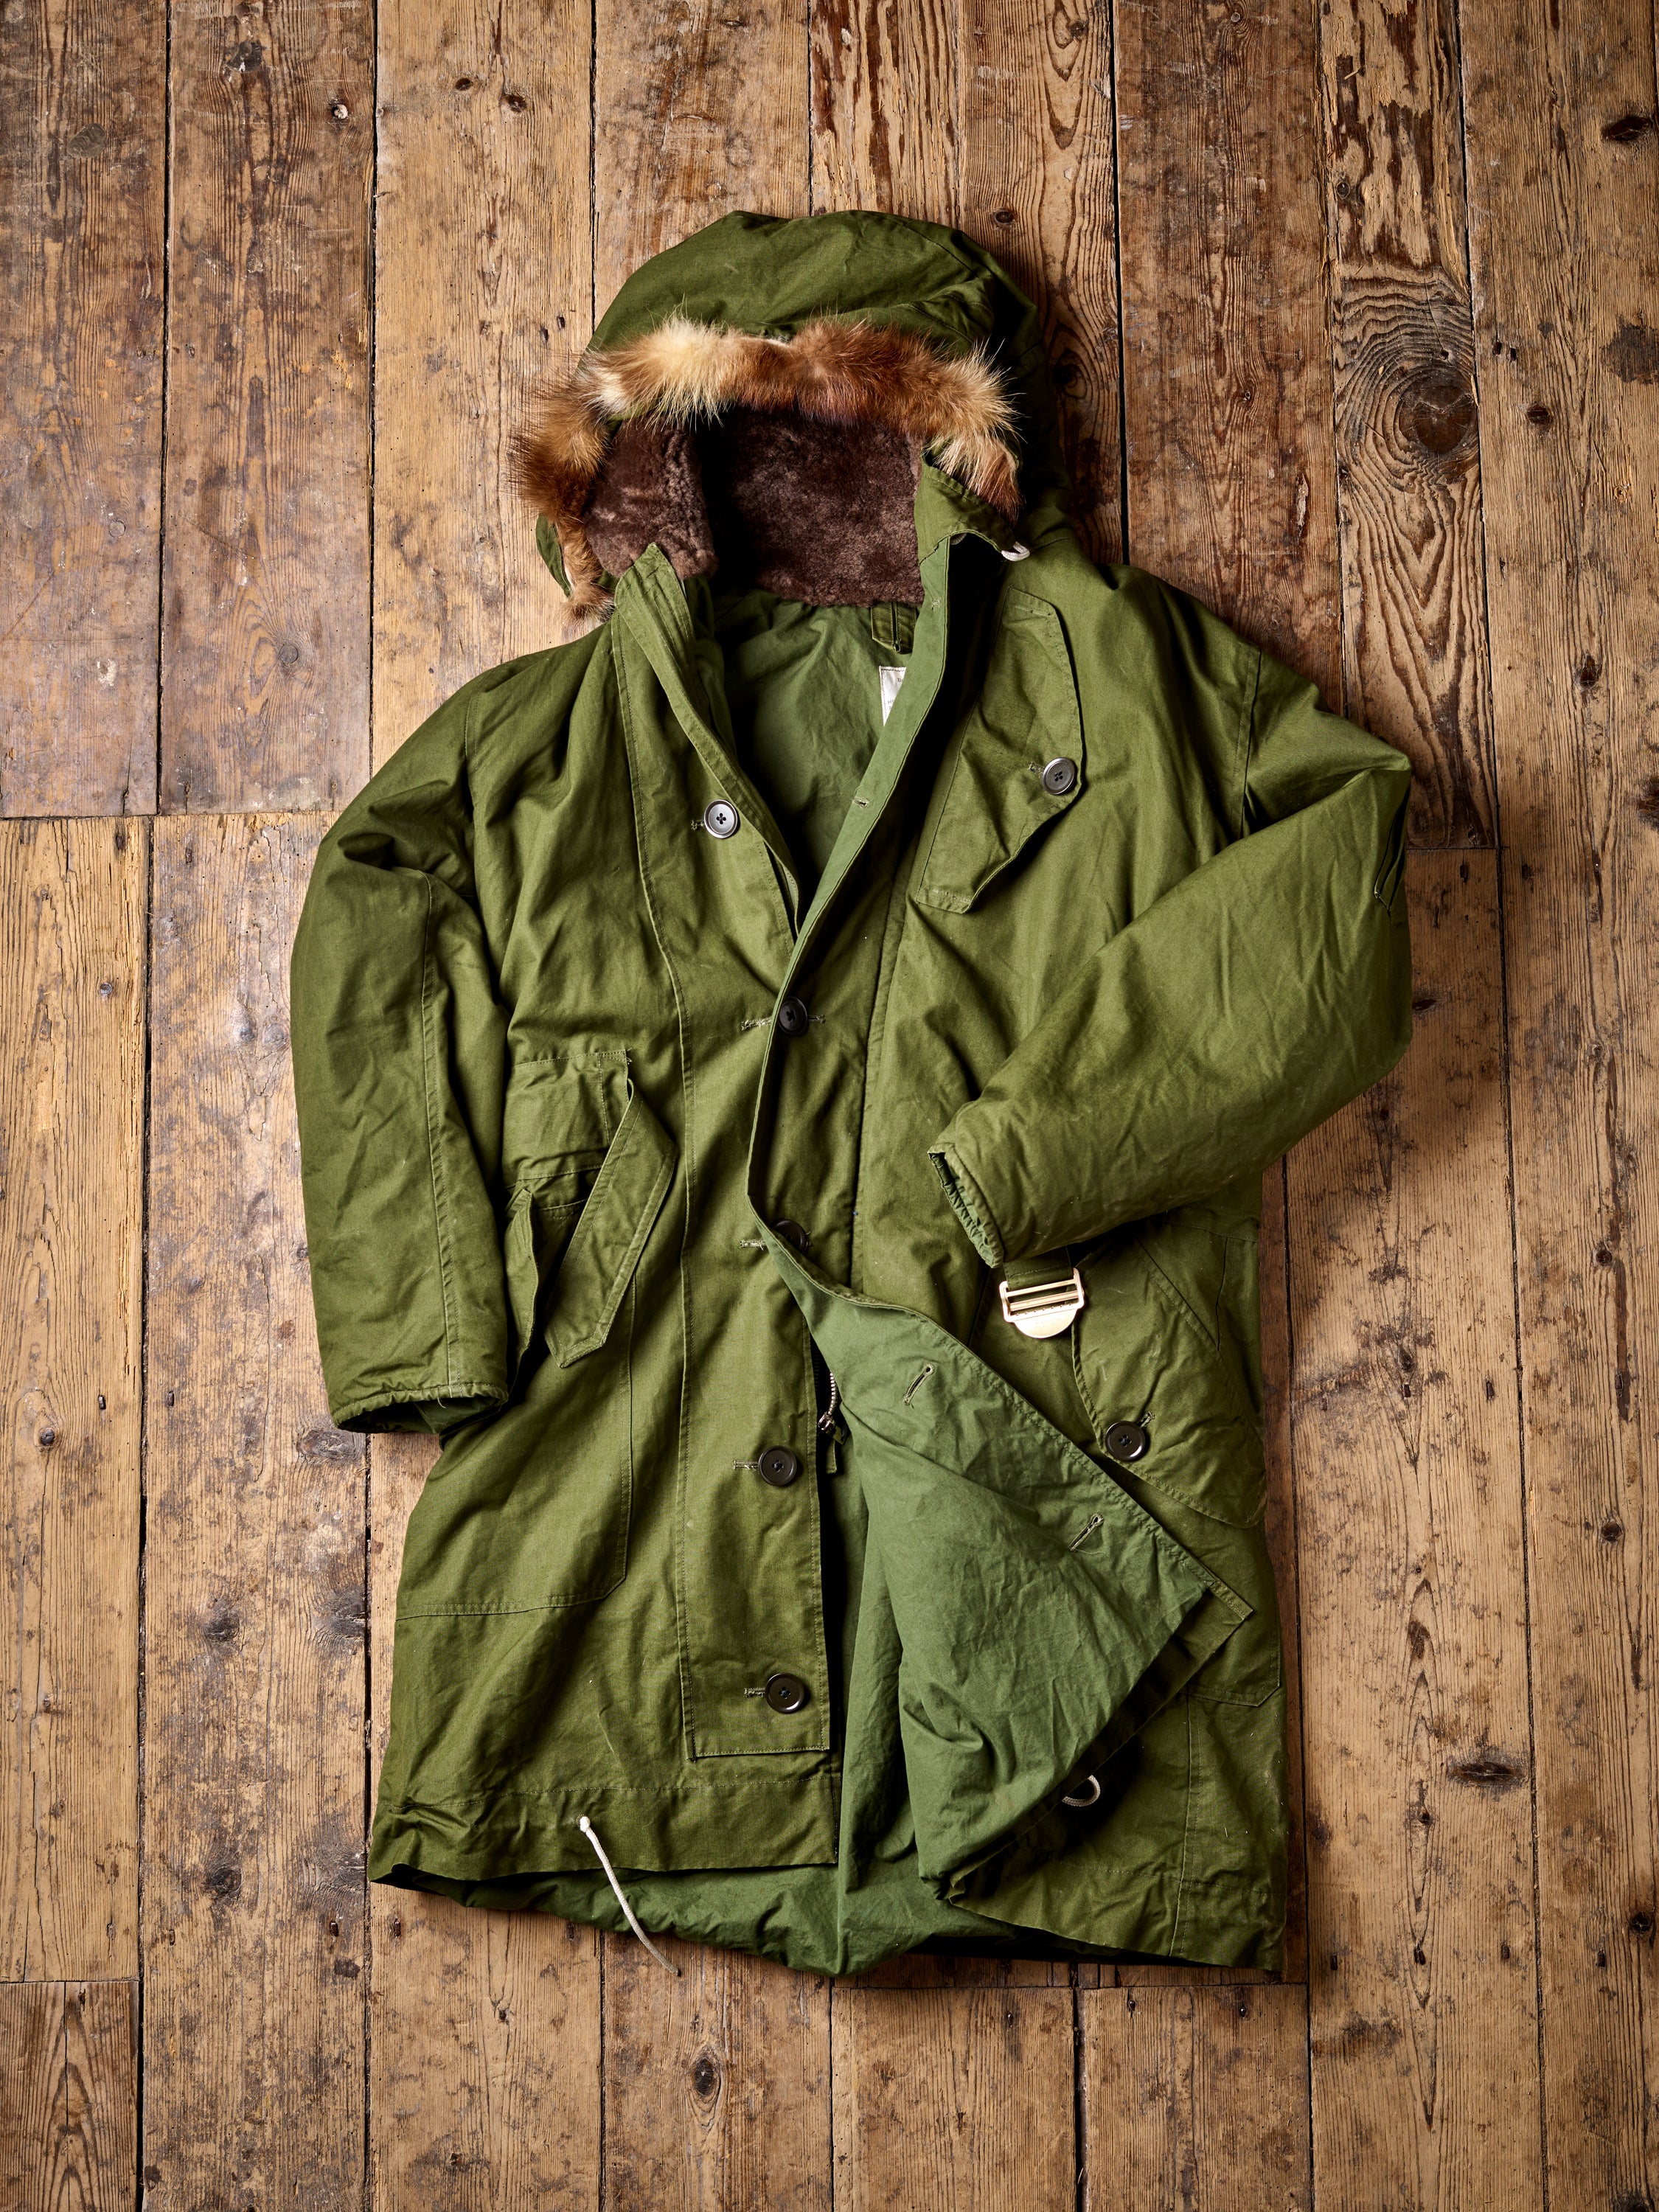 The Royal Air Force Cold Weather M1951 Parka